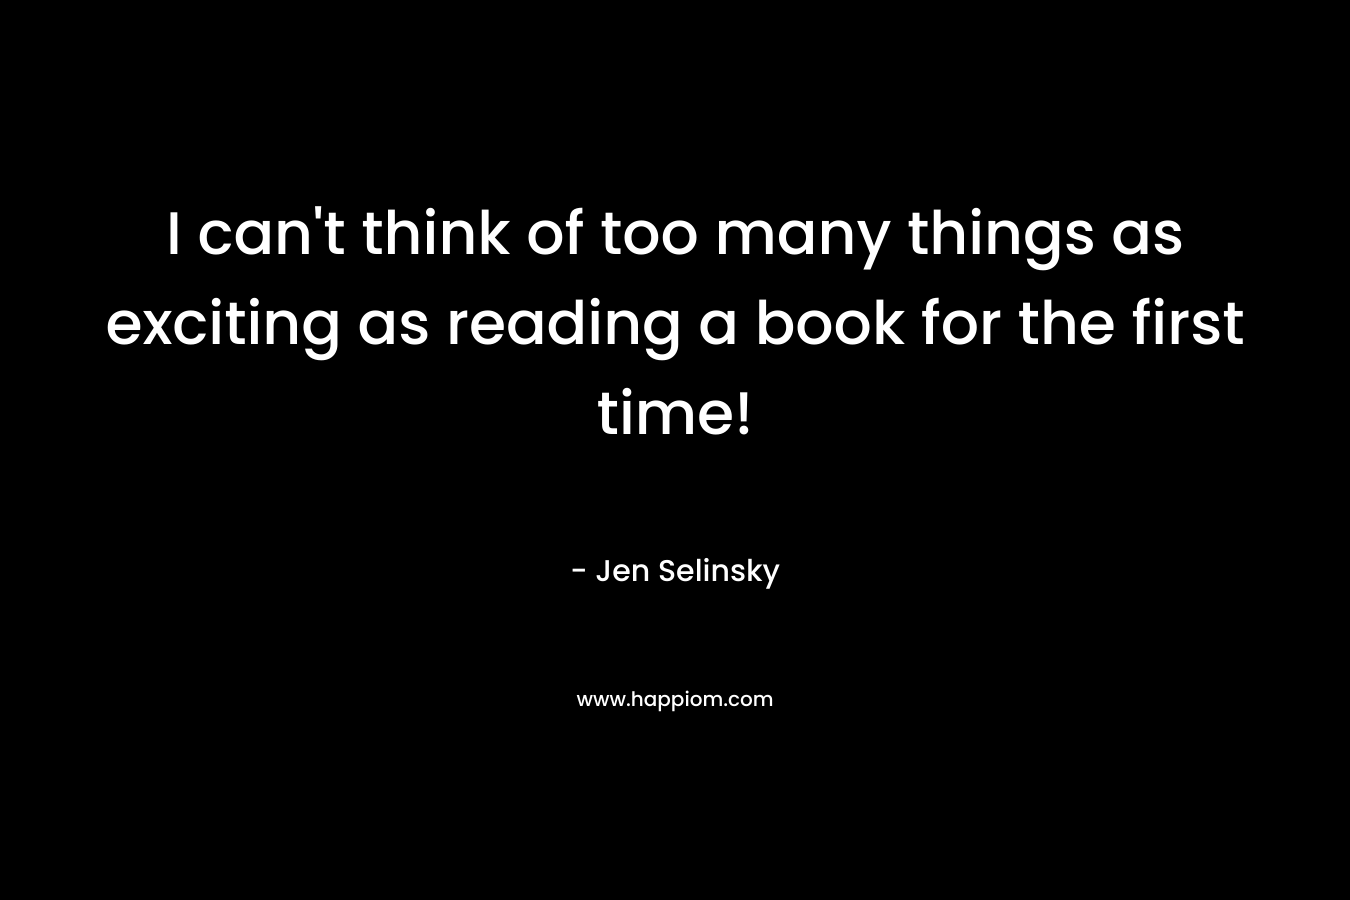 I can’t think of too many things as exciting as reading a book for the first time! – Jen Selinsky